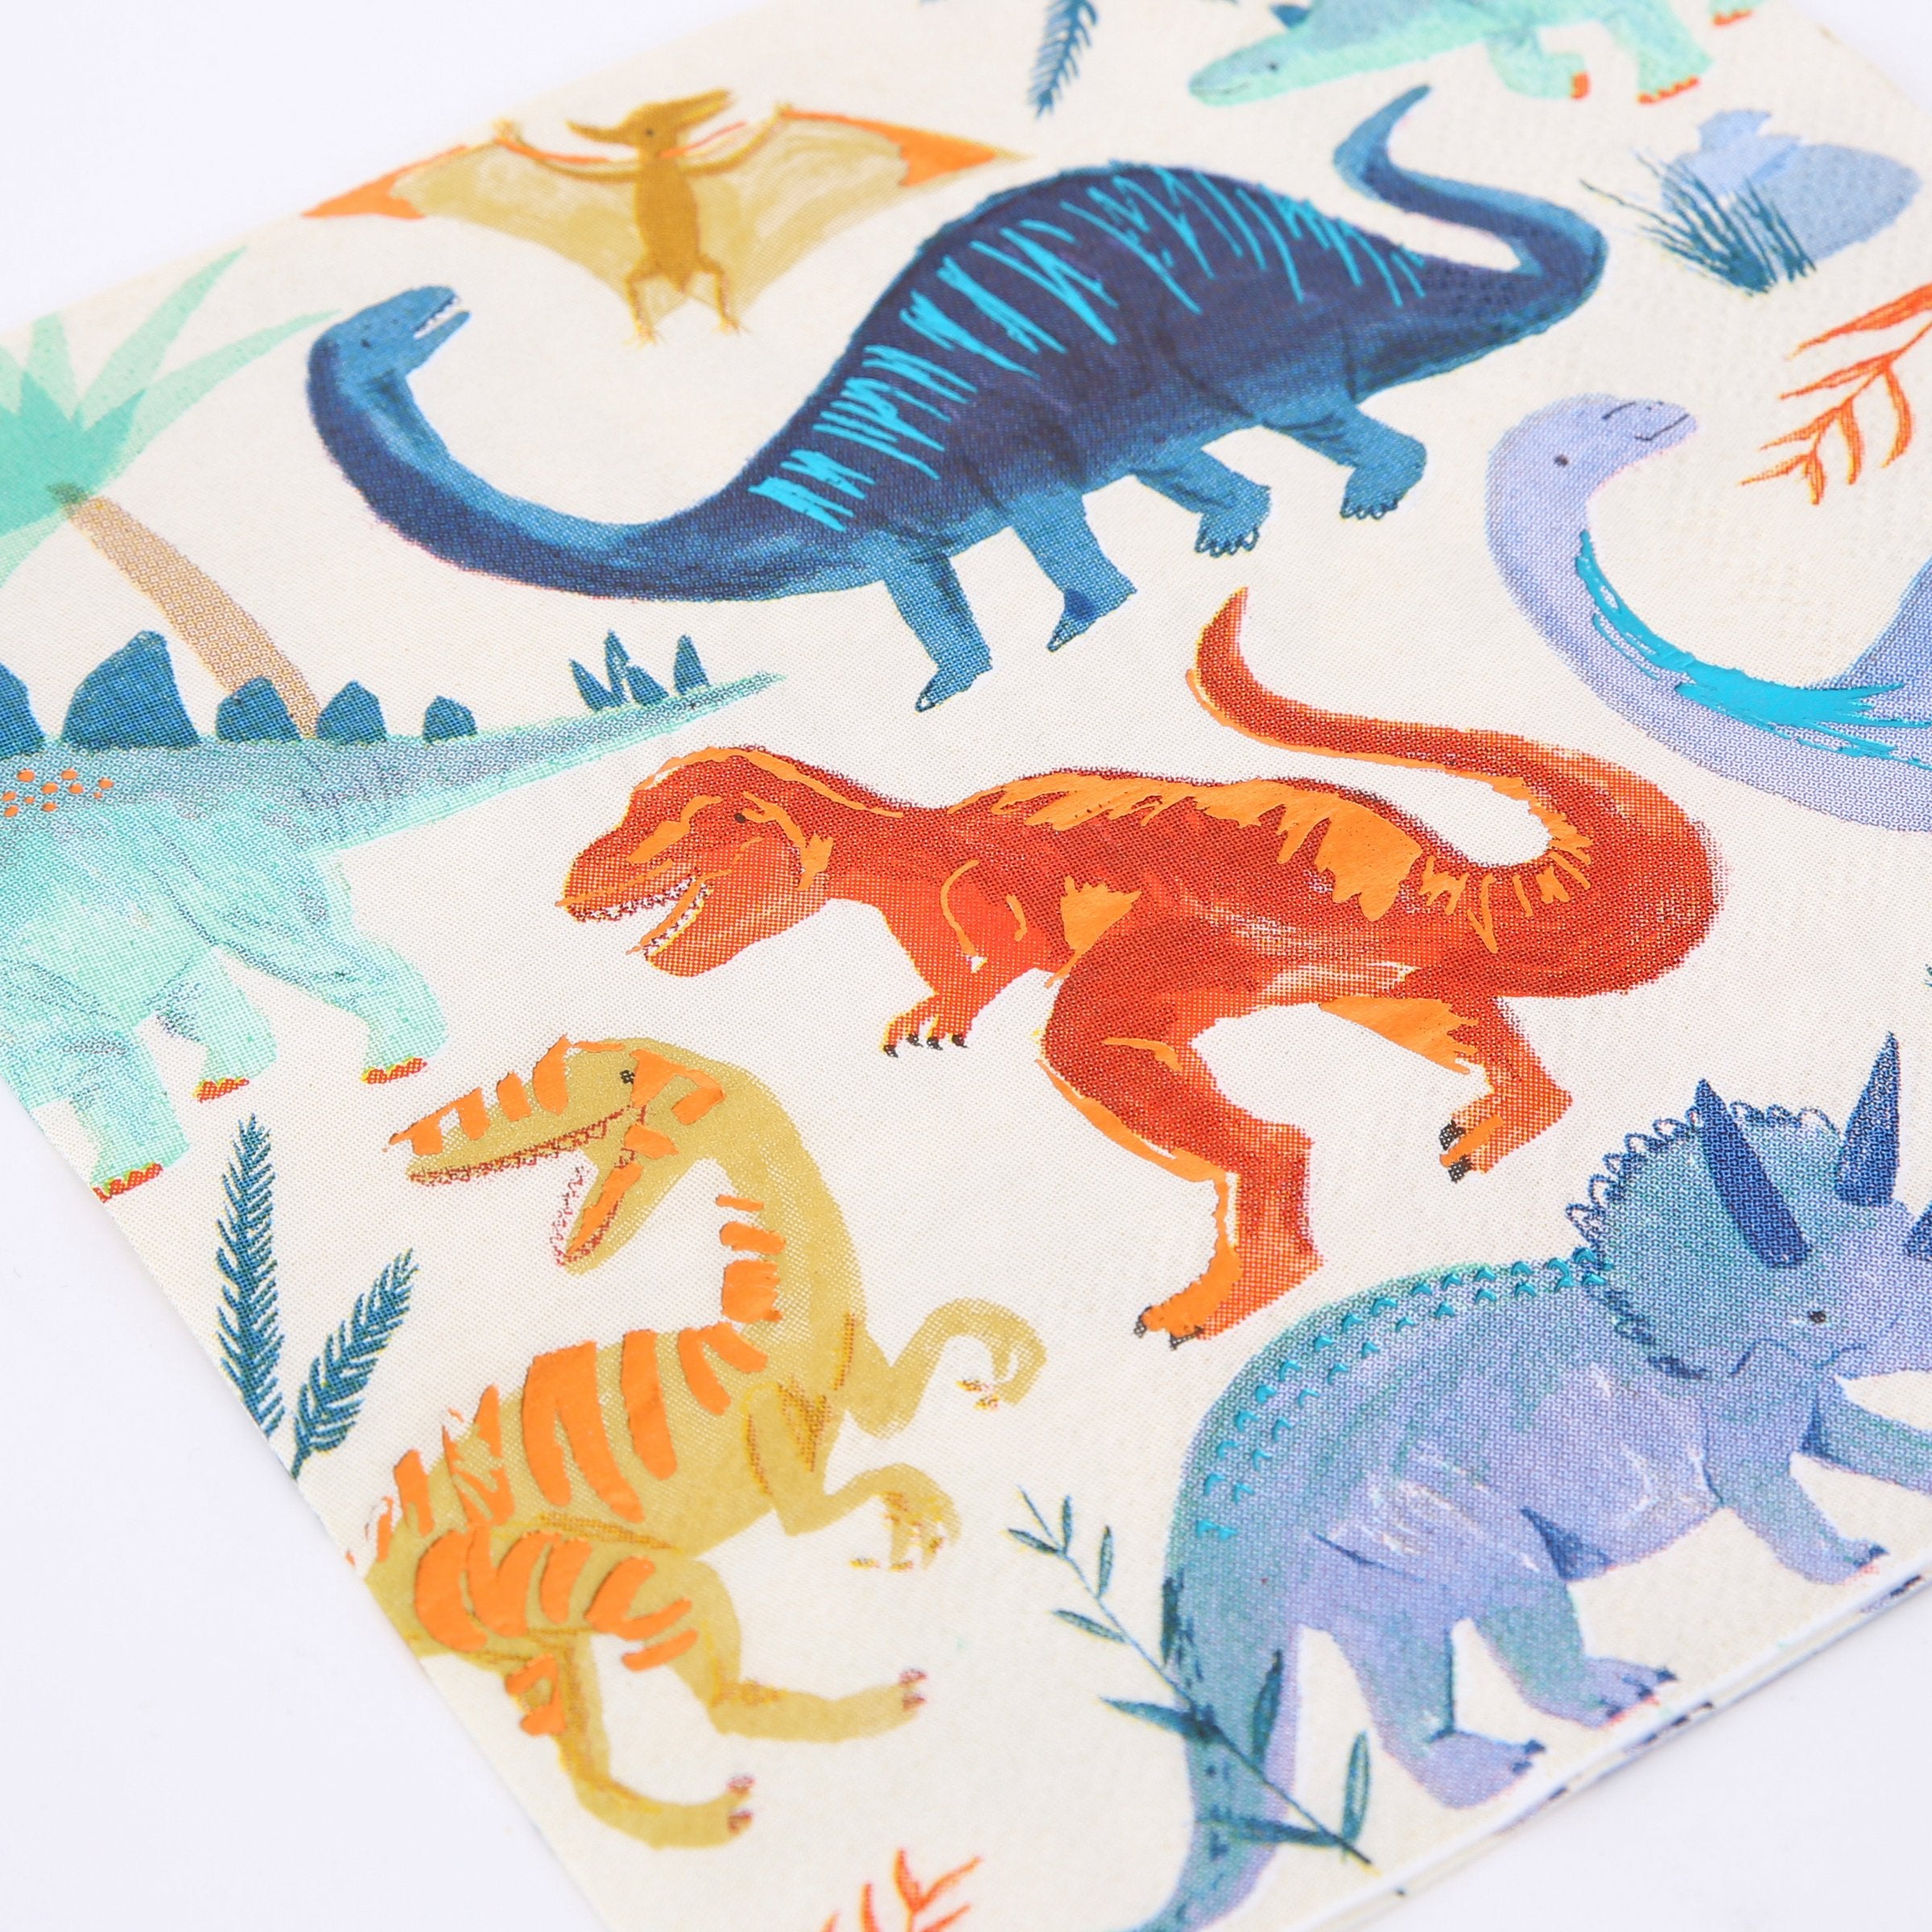 Get all the dinosaur party supplies you need for 8 guests in one box.